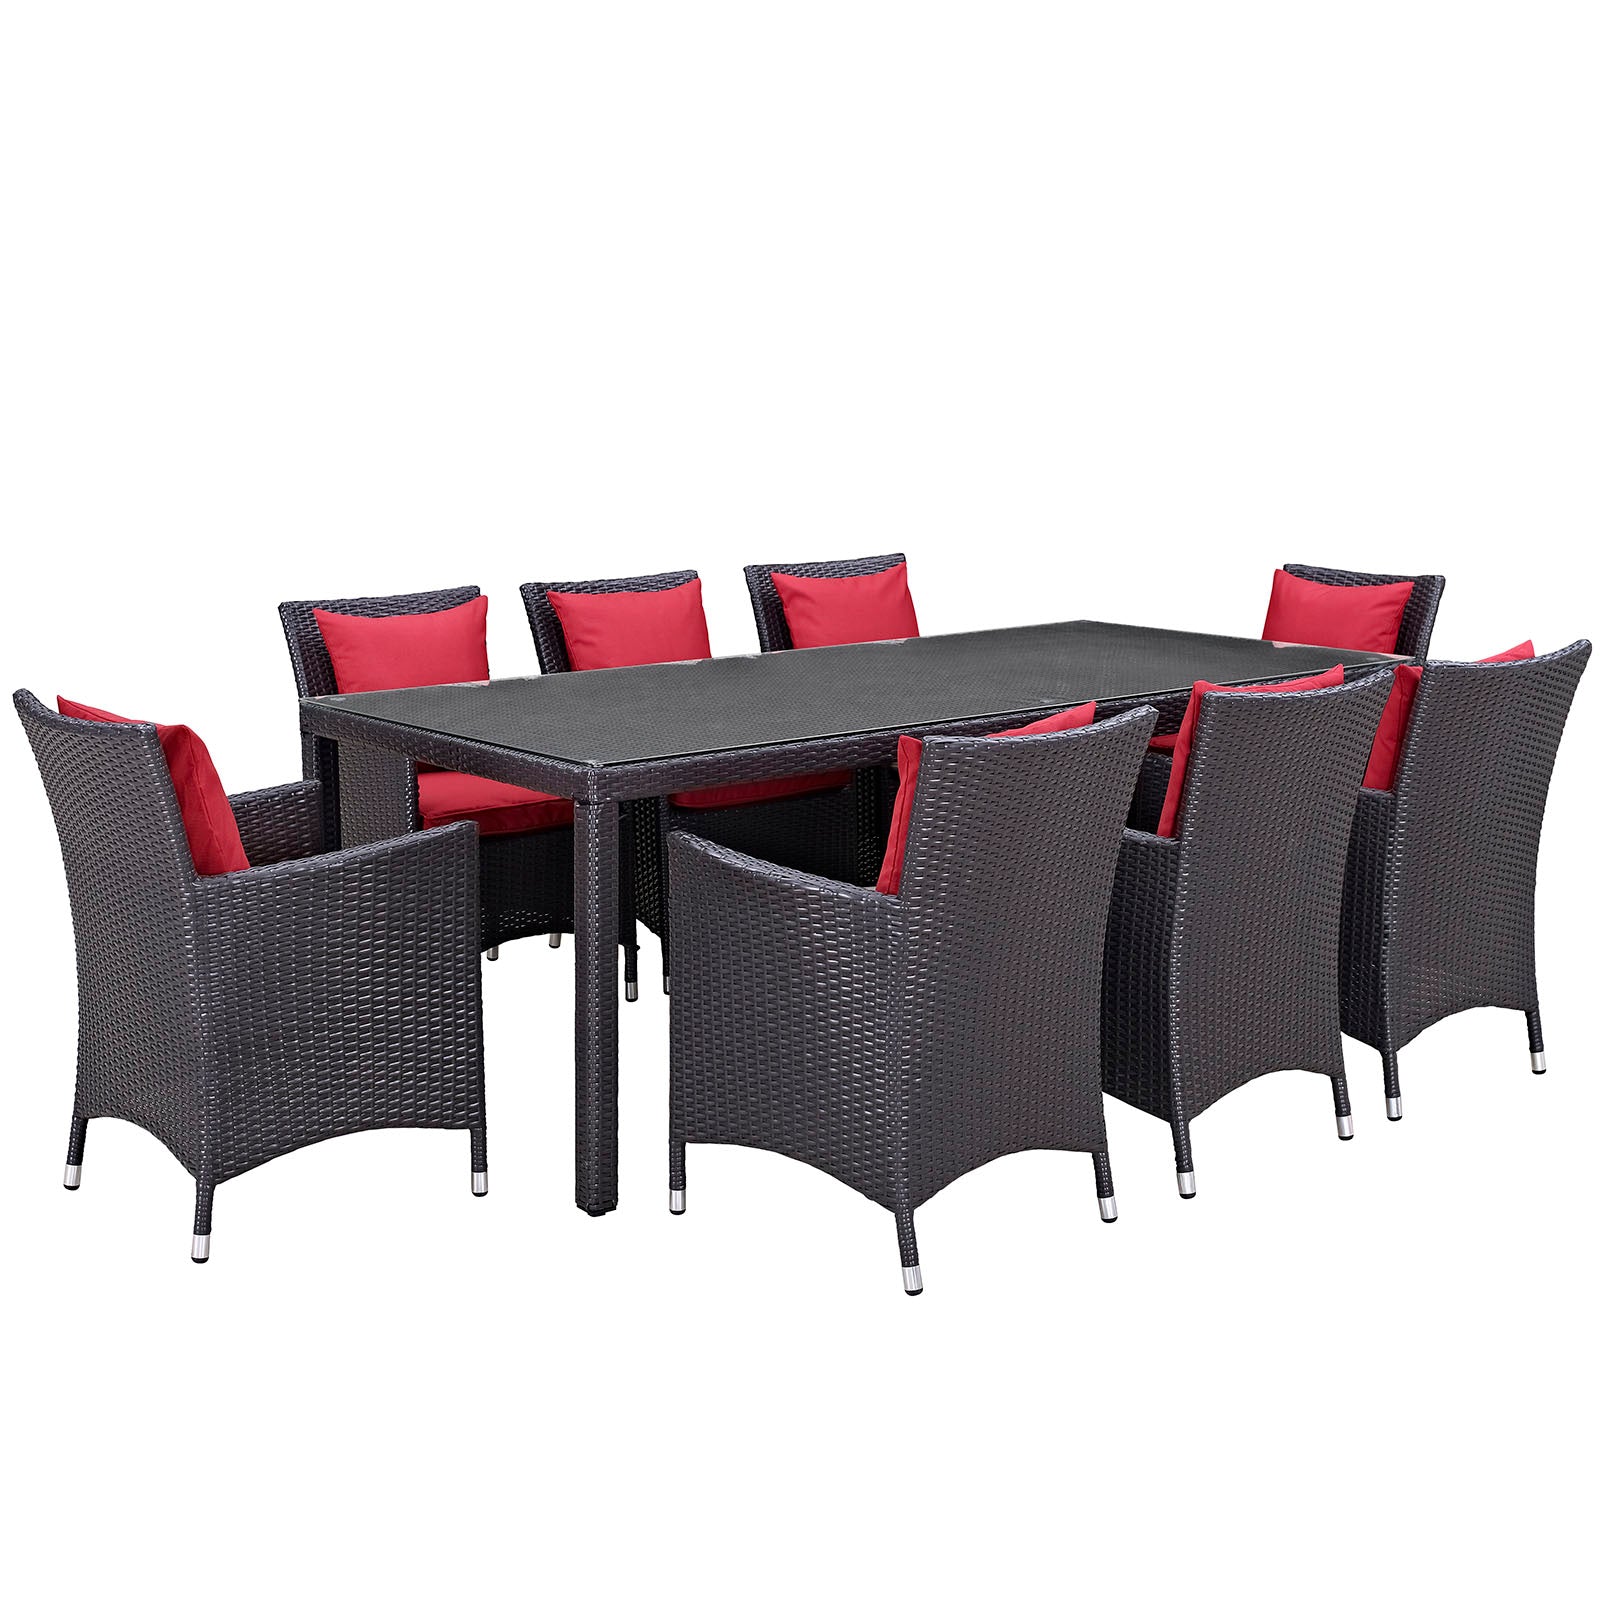 Modway Outdoor Dining Sets - Convene 9 Piece Outdoor Patio Dining Set Espresso Red